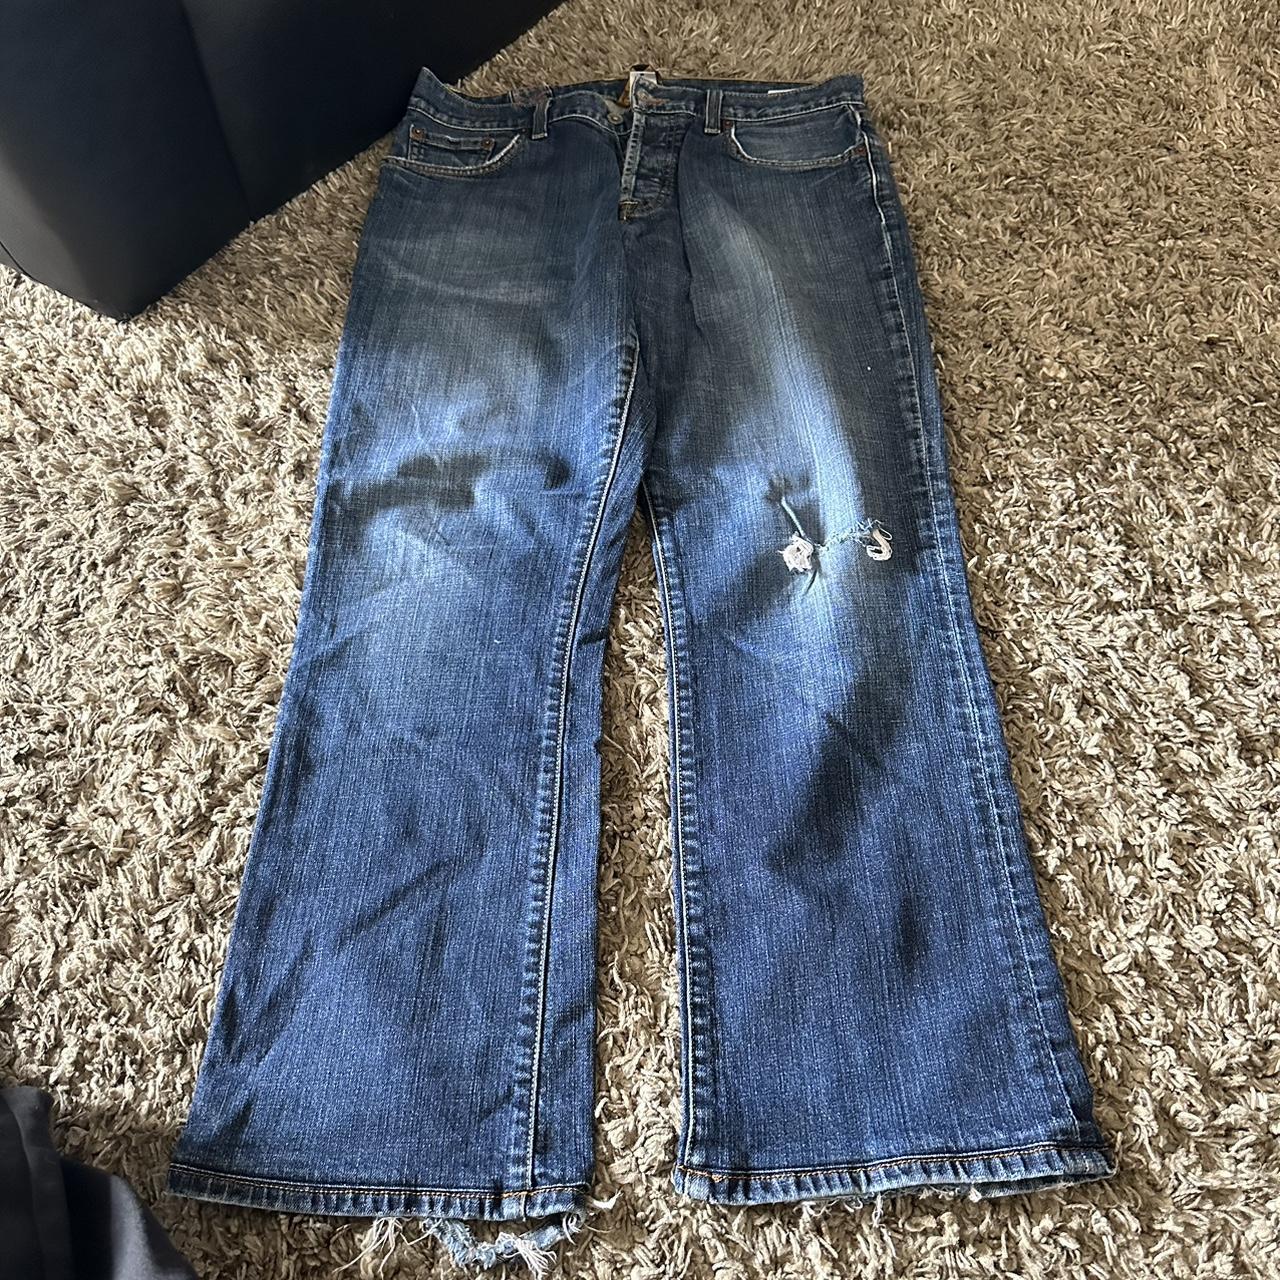 lucky brand jeans flaws shown in pictures - Depop